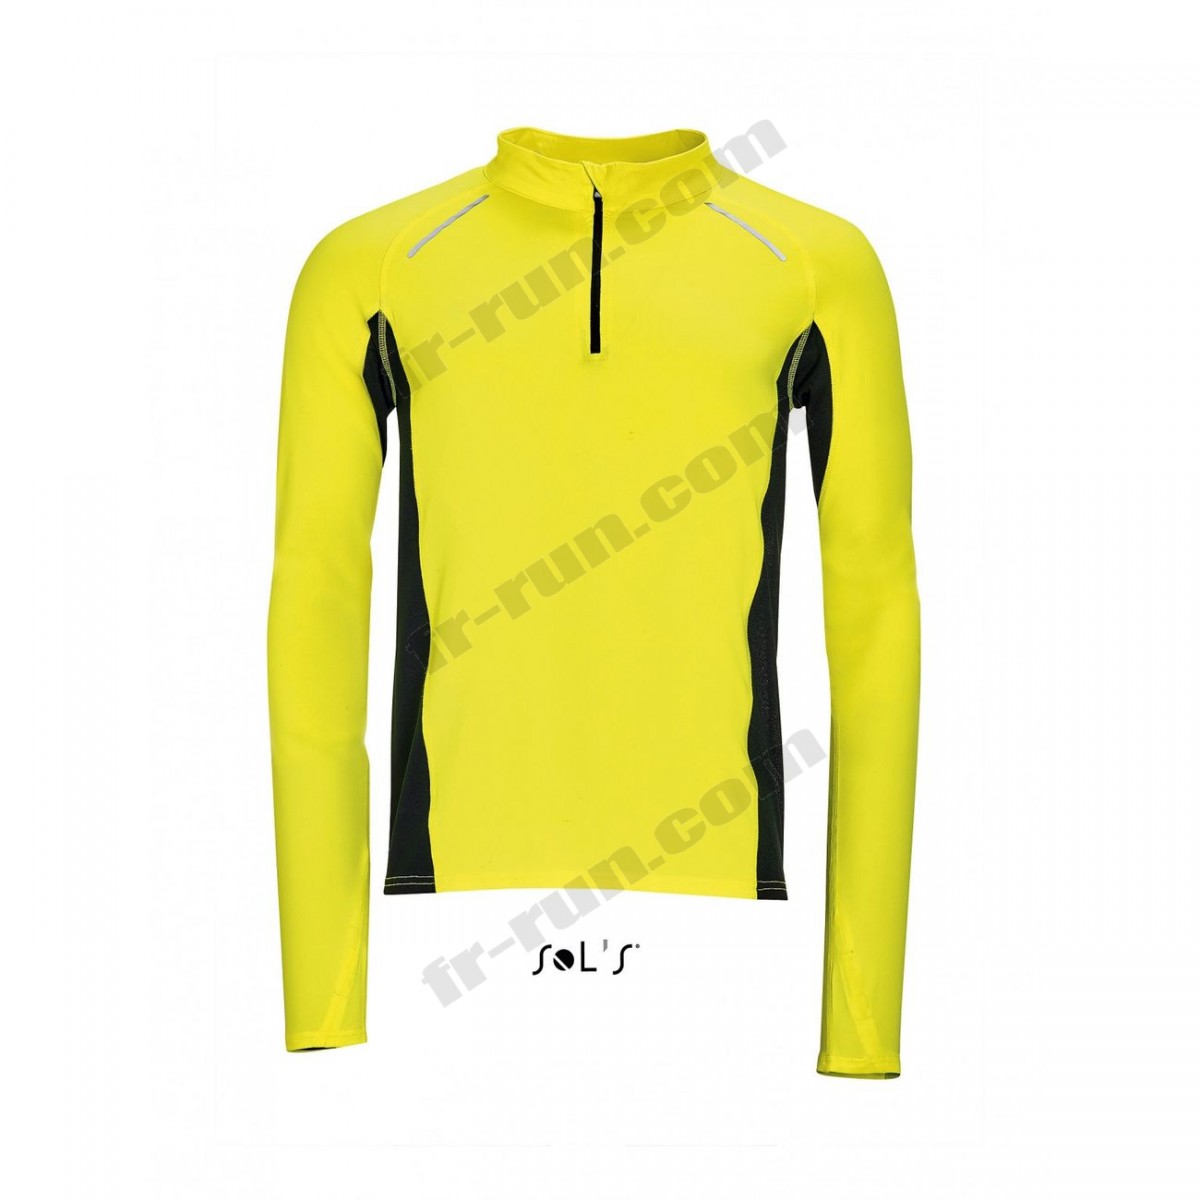 Sol S/running adulte SOL S t-shirt running manches longues - Homme - 01416 - jaune fluo √ Nouveau style √ Soldes - -1